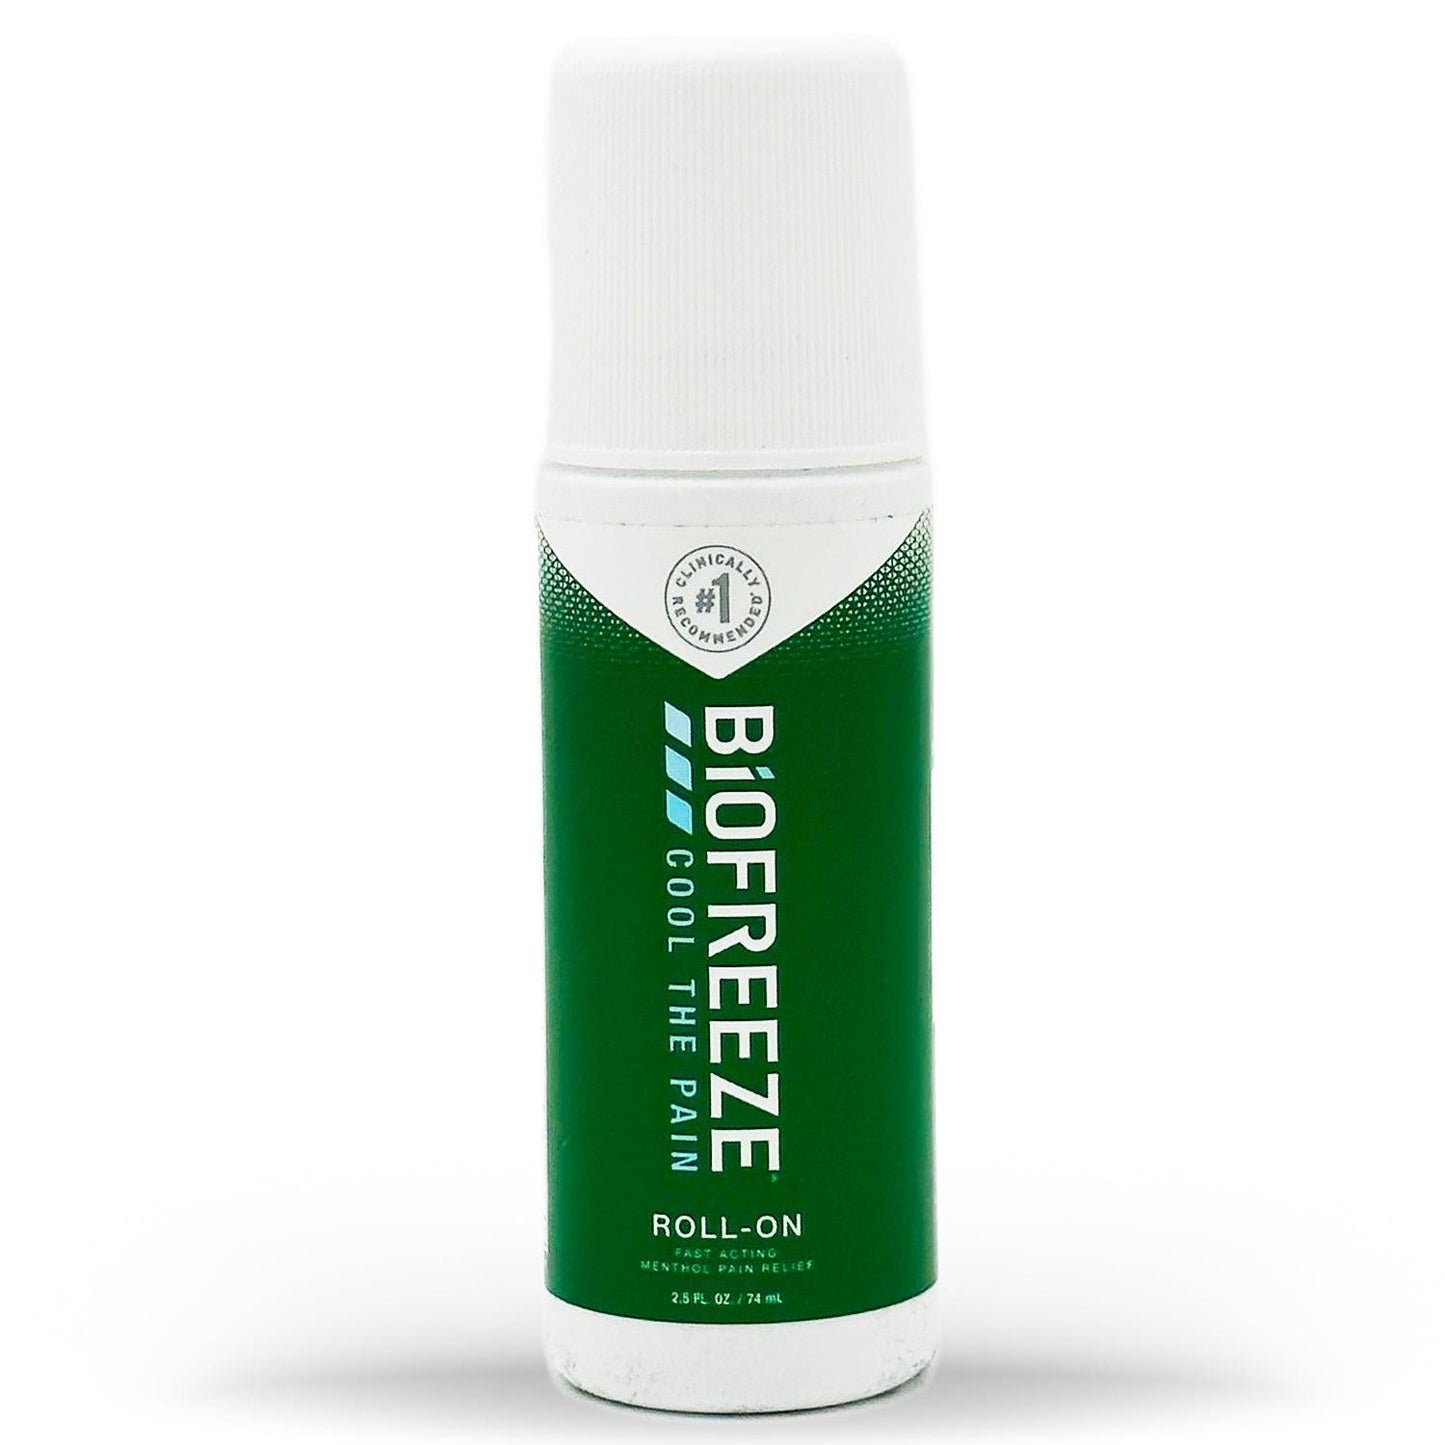 Biofreeze Roll-On Fast Acting Menthol Pain Relief 2.5 Fl Oz | BEST BY 05/25 - Home Revival Shop